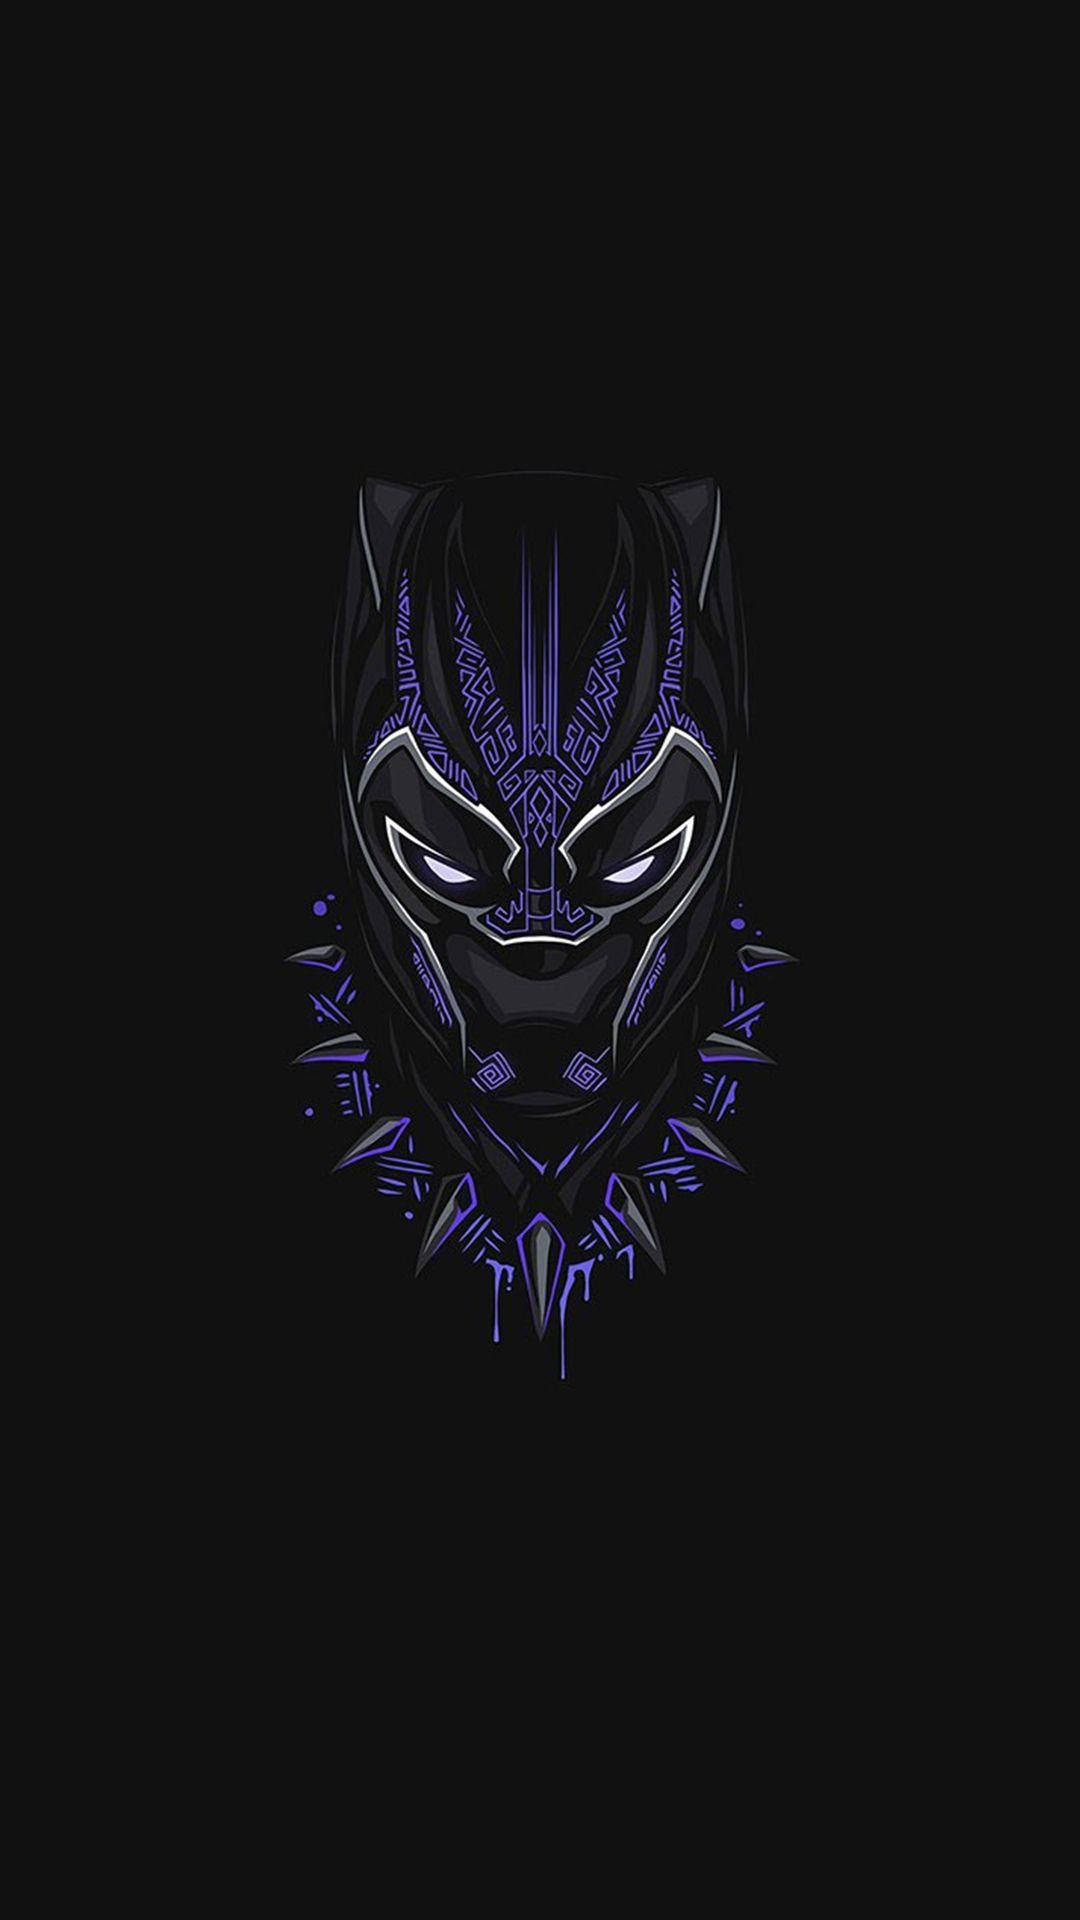 Free Black Panther Android Wallpaper Downloads, Black Panther Android Wallpaper for FREE